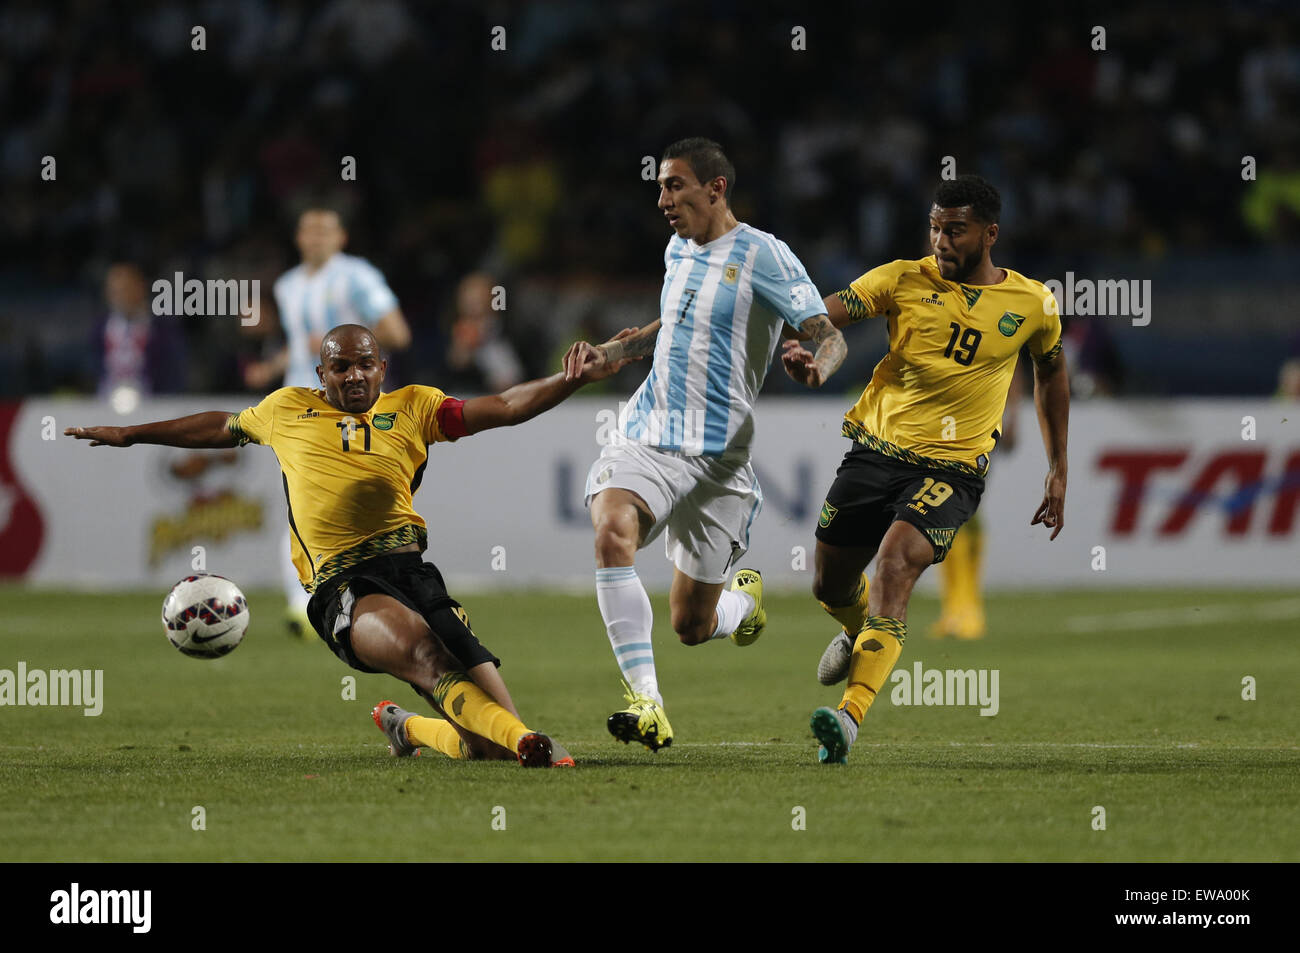 Vina Del Mar, Chile. 20th June, 2015. Argentina's Angel Di Maria (C) vies for the ball with Jamaica's Rodolph Austin (L) and Adrian Mariappa (R) during a Group B match at the 2015 American Cup, held at Sausalito Stadium in Vina del Mar, Chile, on June 20, 2015. Argentina won 1-0. Credit:  Guillermo Arias/Xinhua/Alamy Live News Stock Photo